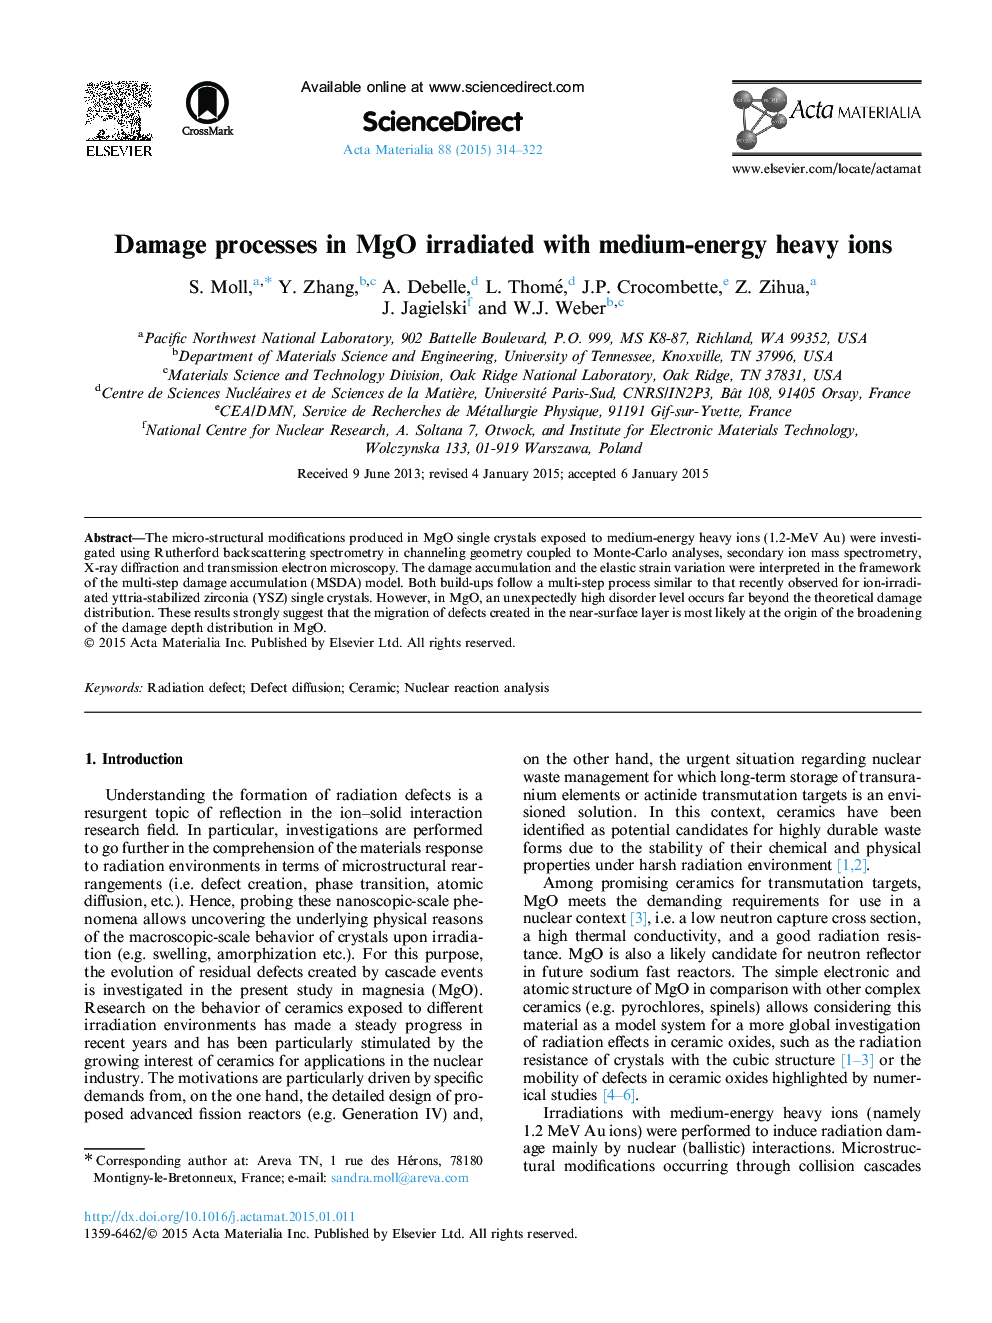 Damage processes in MgO irradiated with medium-energy heavy ions